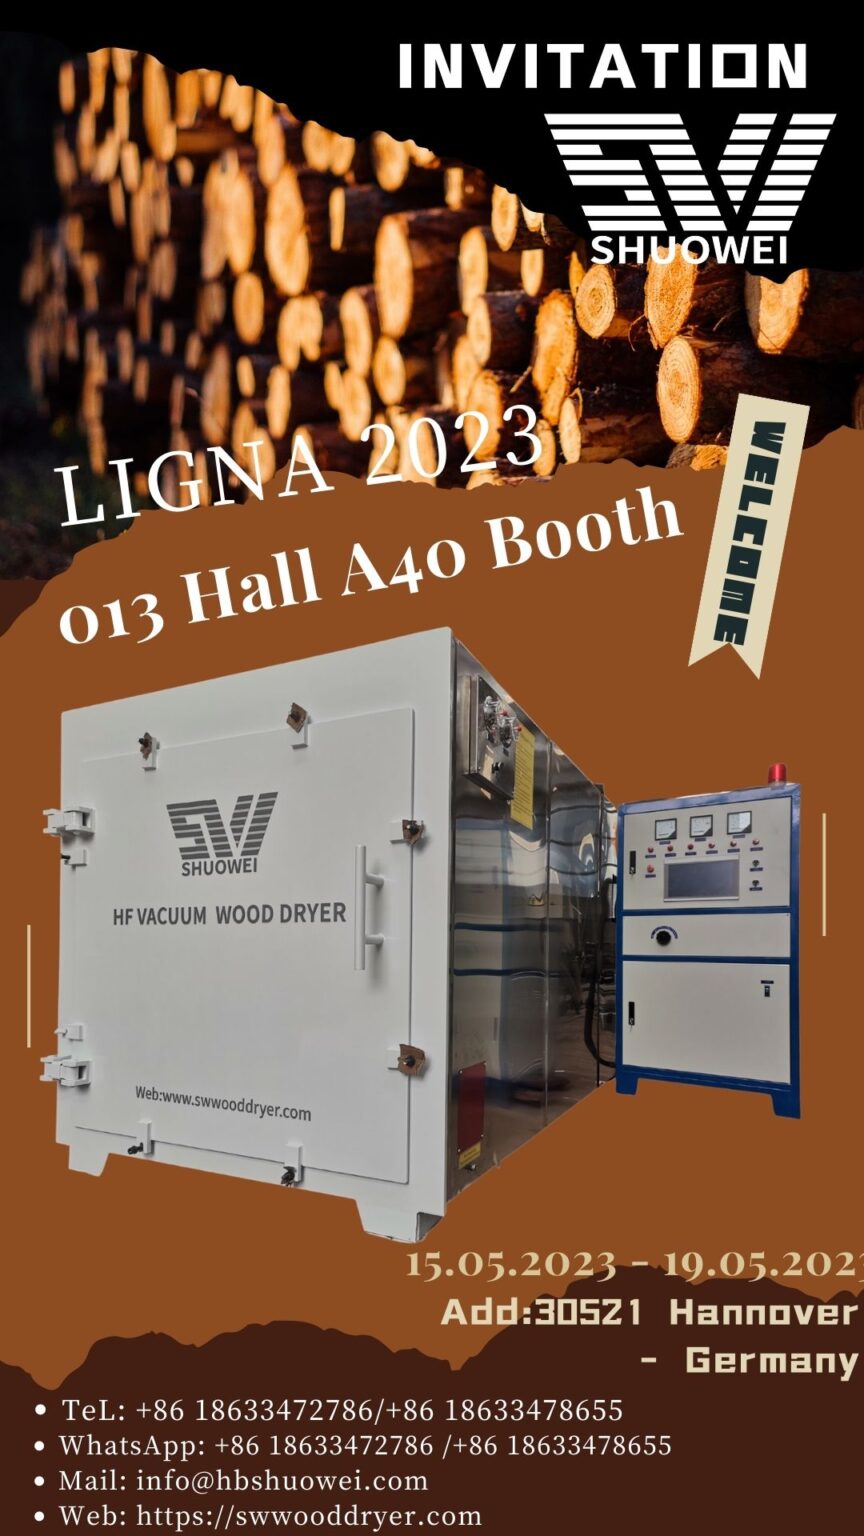 LIGNA 2023 World Woodworking Exhibition in Hannover